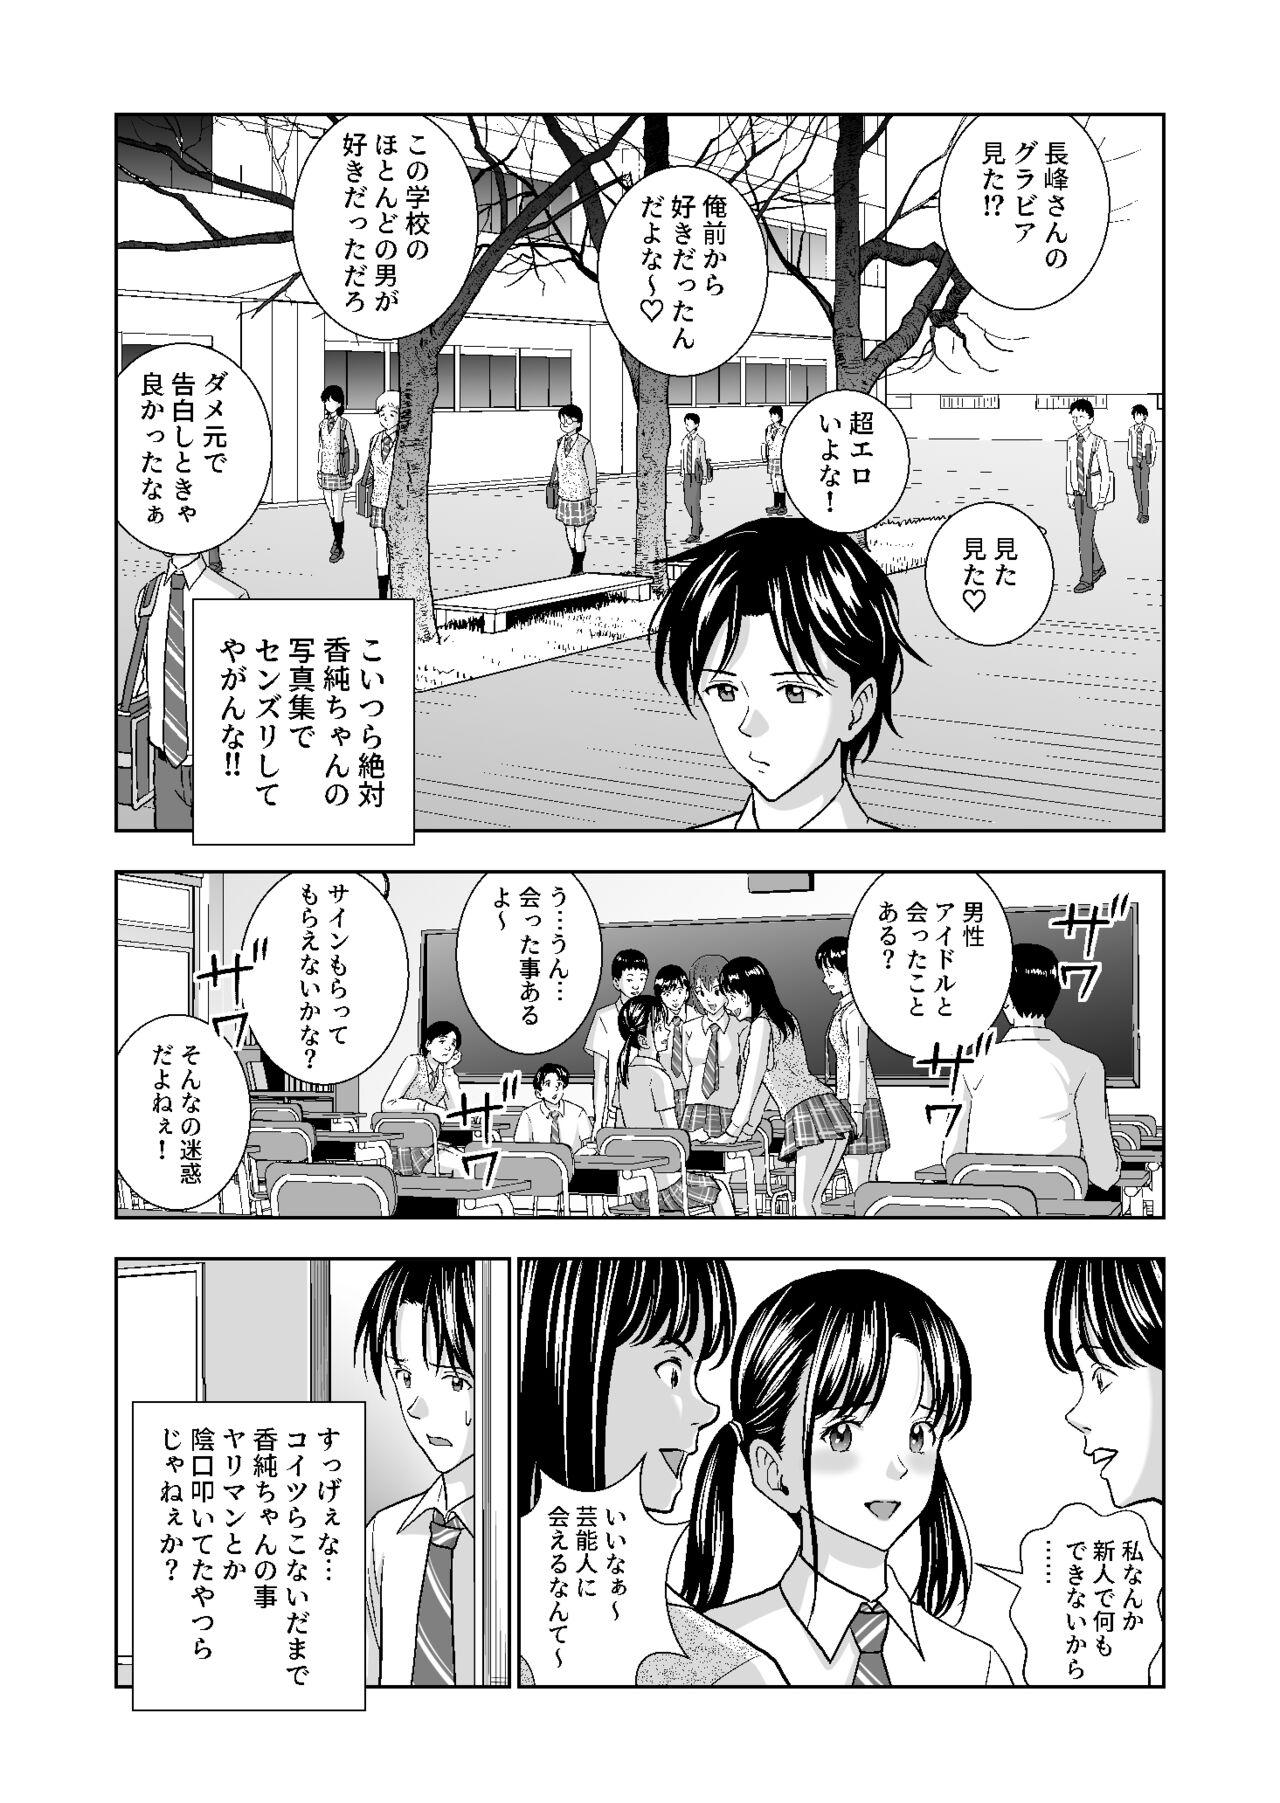 Animation 春くらべ4 - Original Firsttime - Page 4